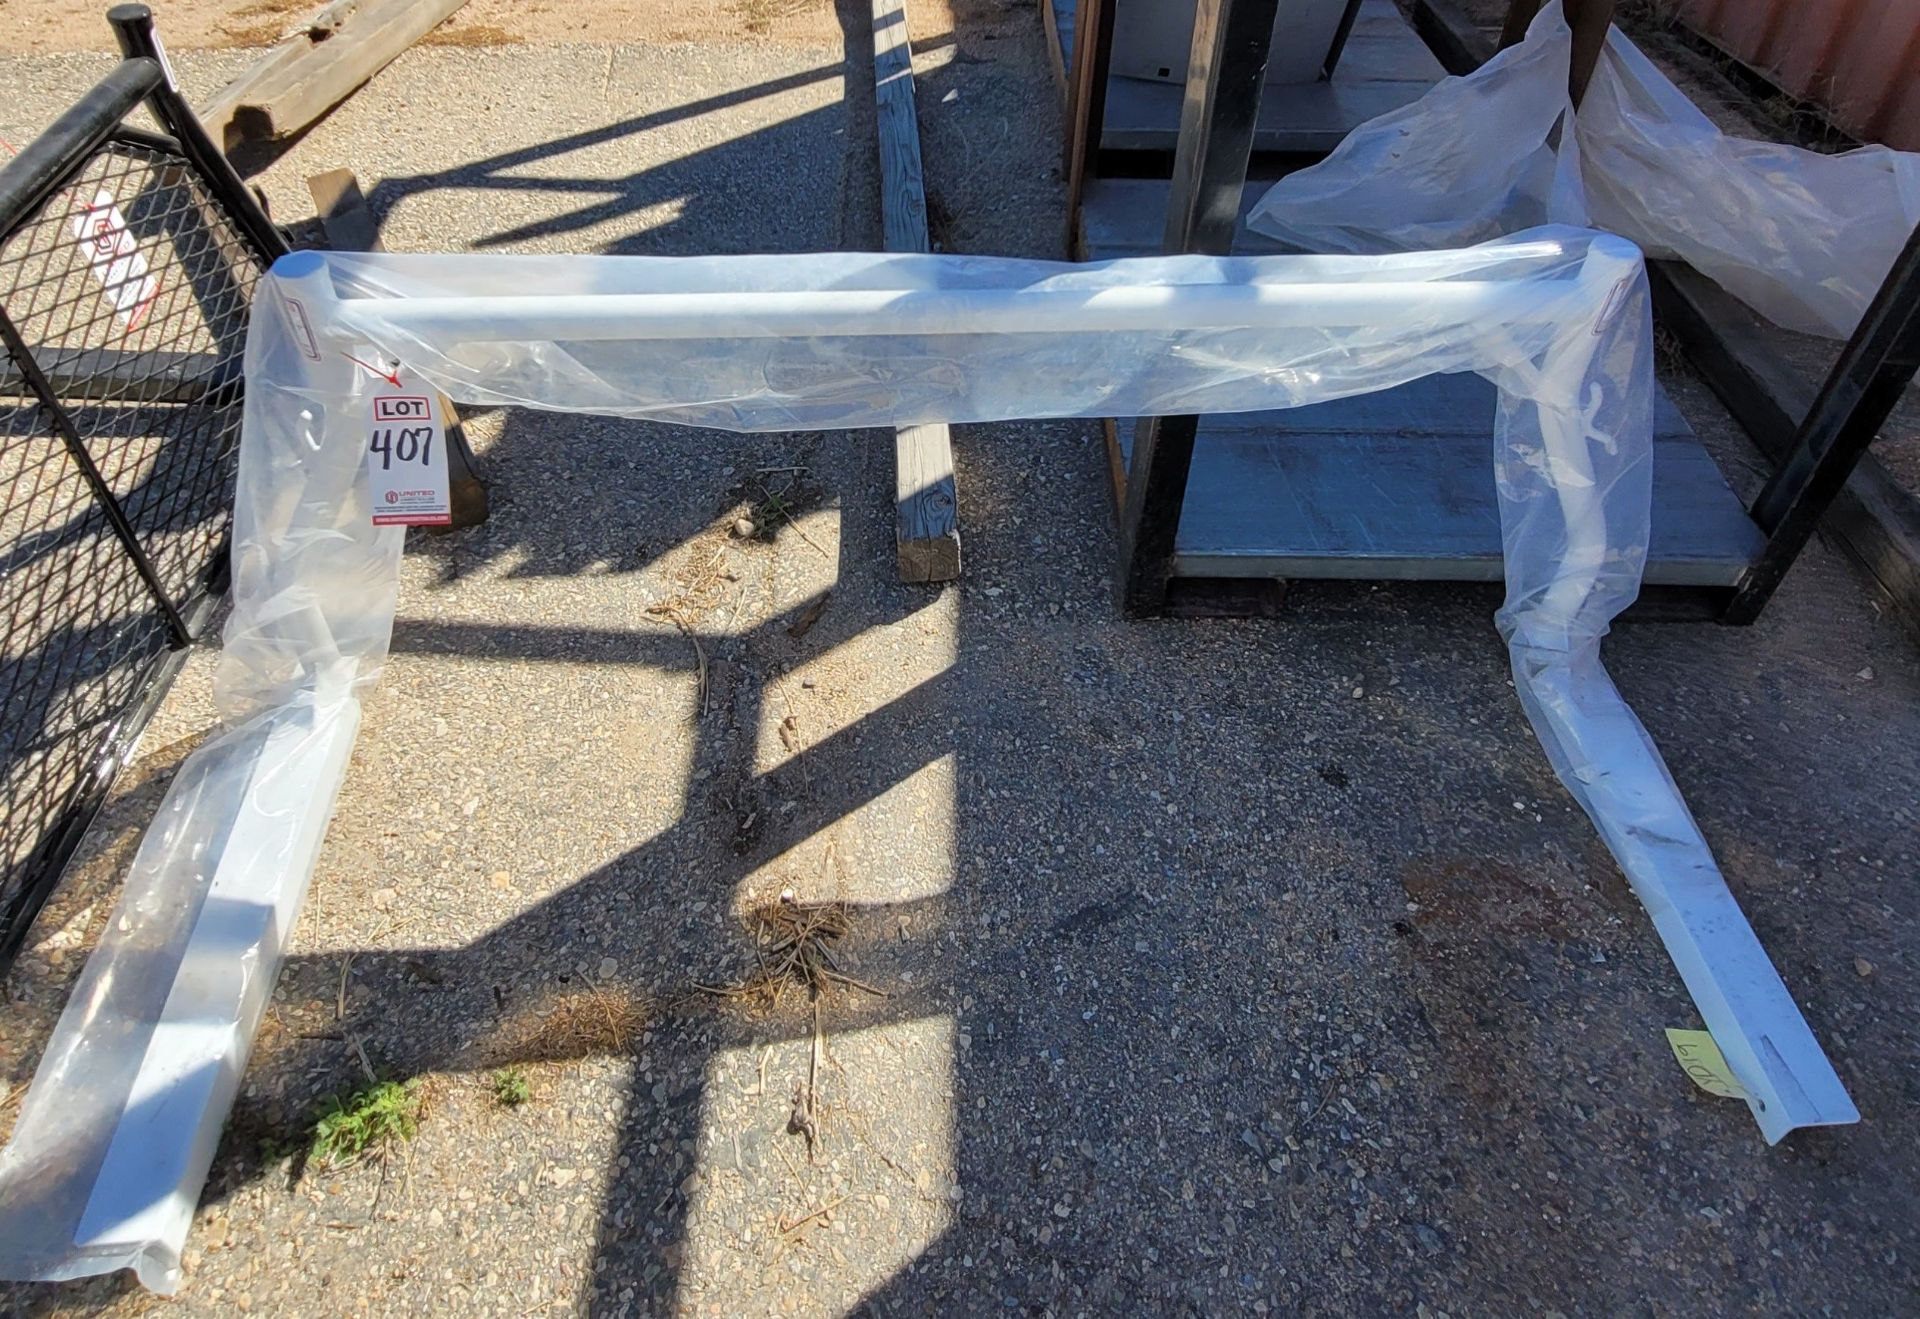 MCWELCO YOKE RACK, 27.5" TALL W/ WELDED ARMS, FITS DODGE, 2019 ONLY